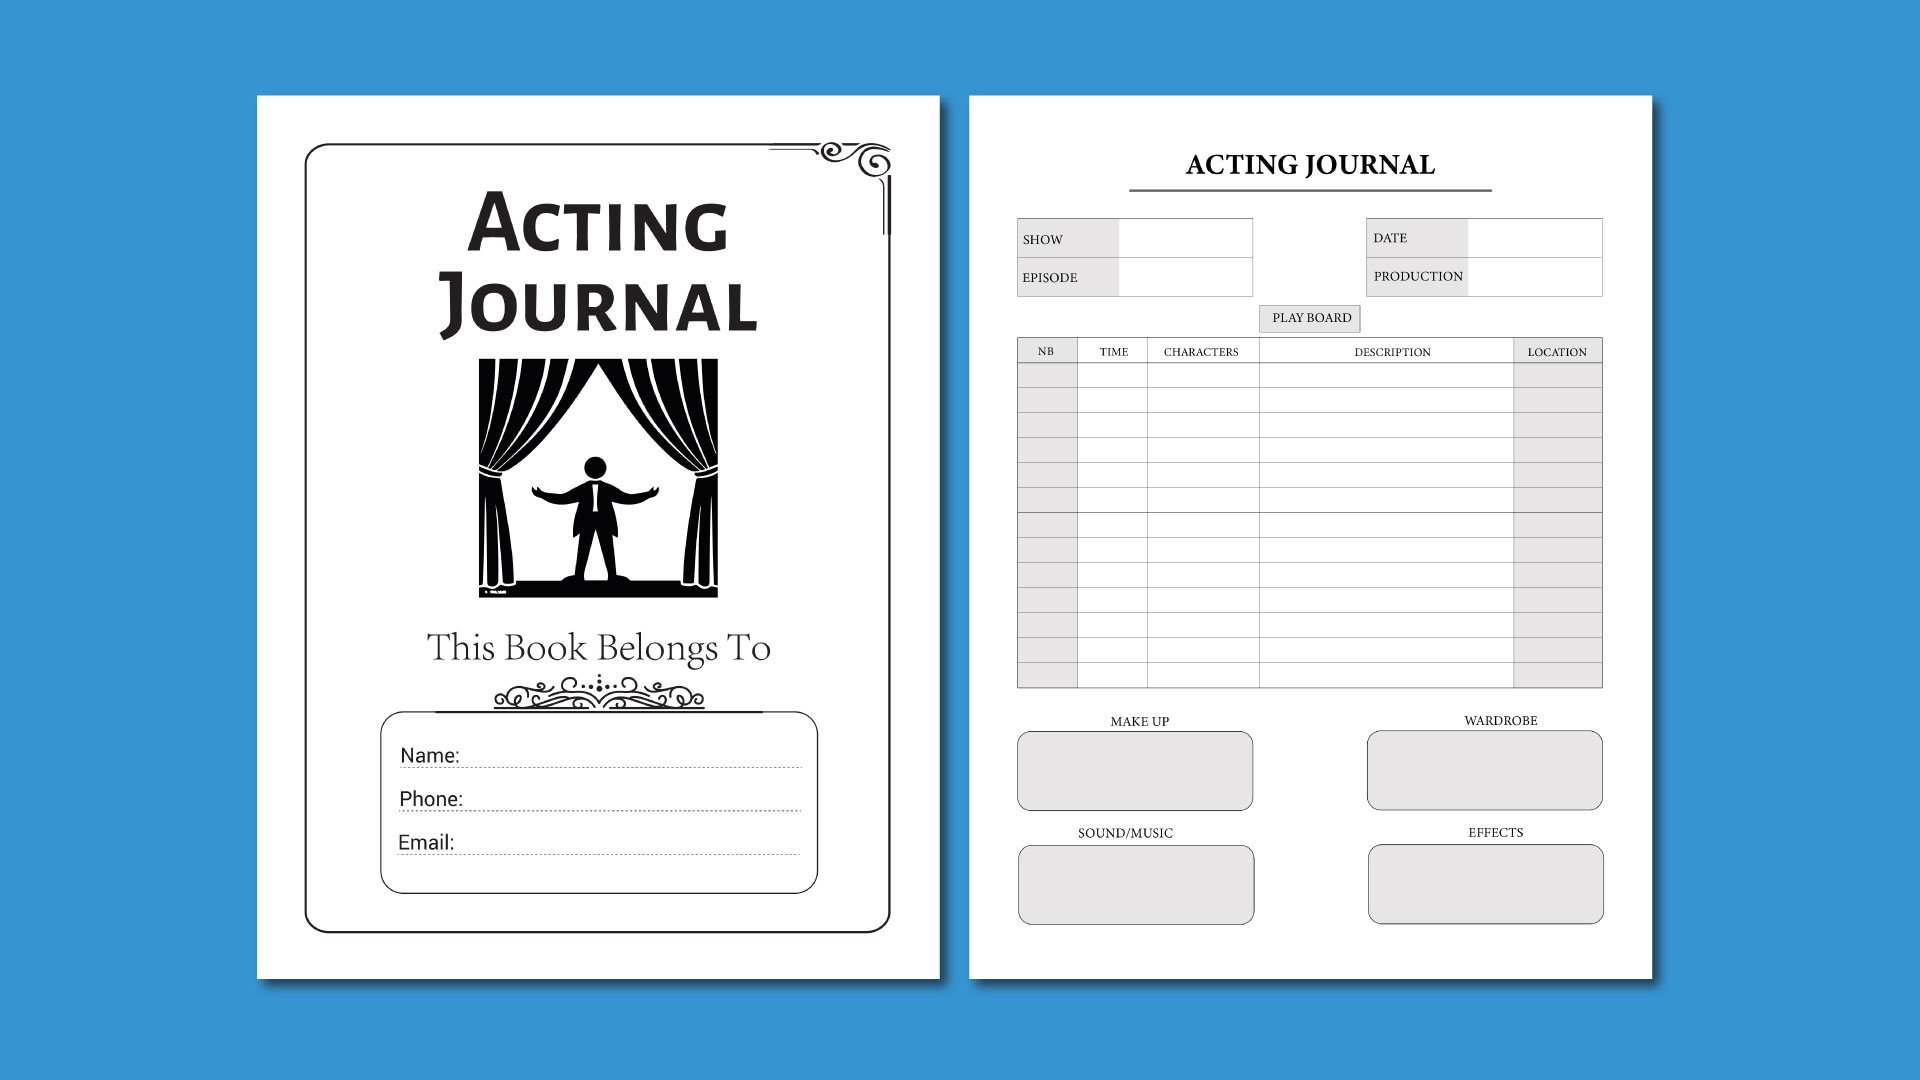 The acting journal is open on a blue background.